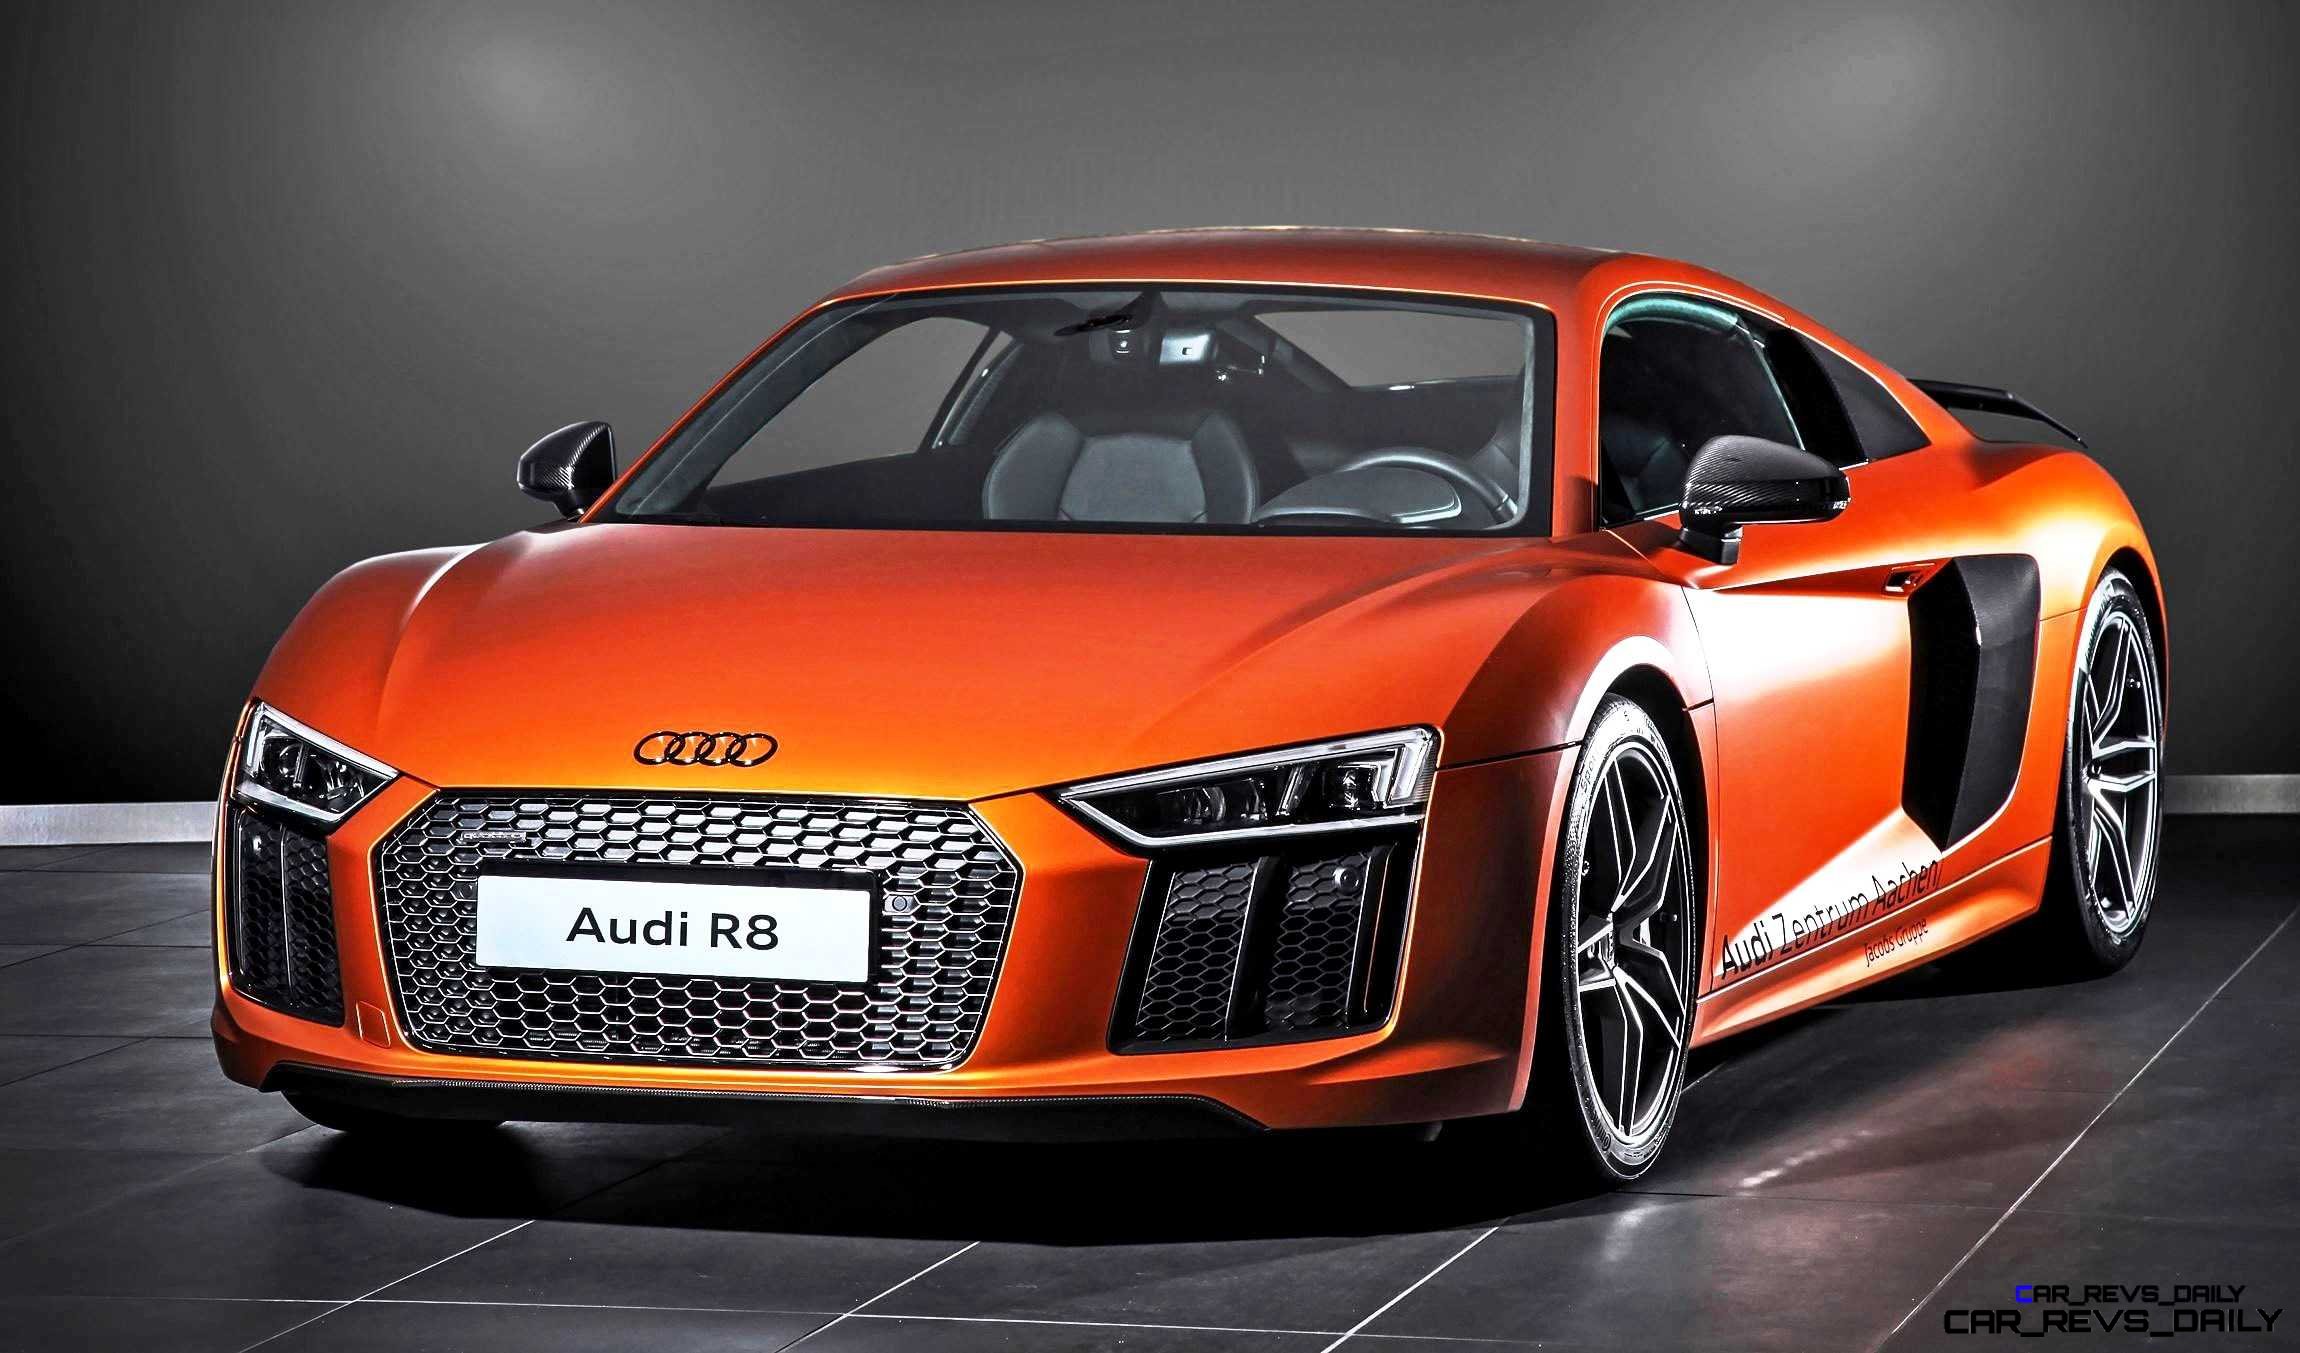 2016 Audi R8 V10 Priced from $162,900 in the US - GTspirit